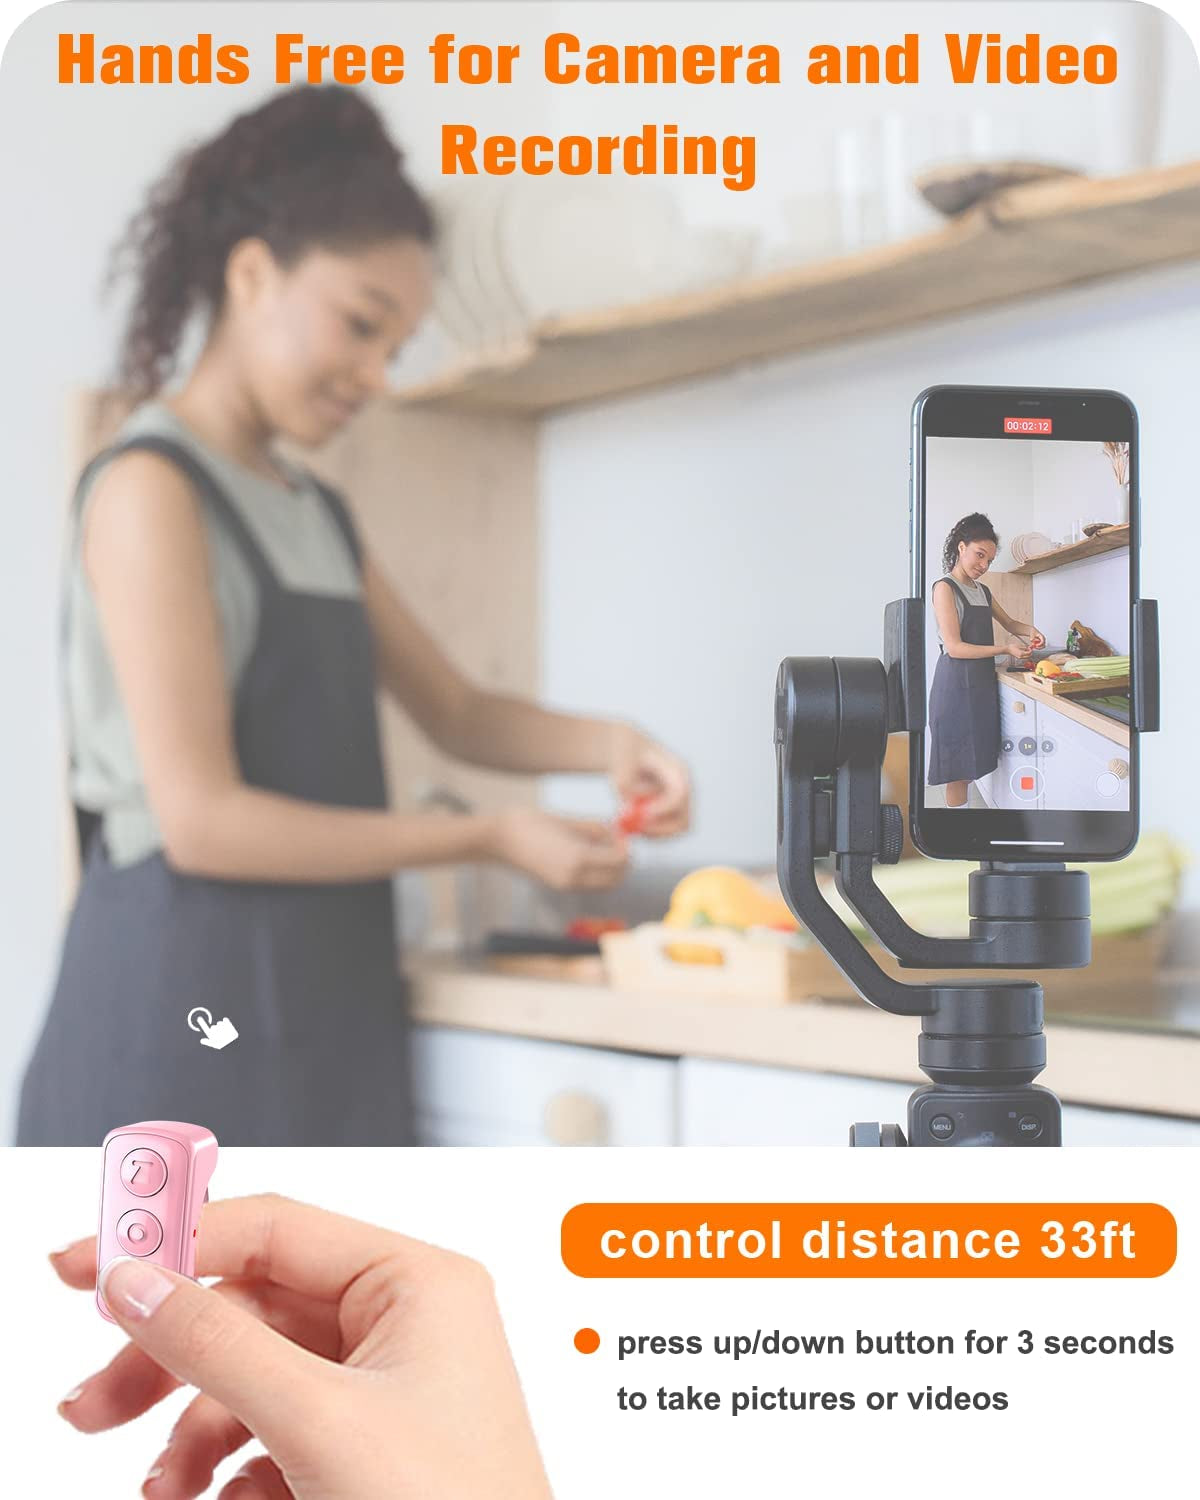 Tiktok Remote Control Kindle App Page Turner, Bluetooth Camera Video Recording Remote, TIK Tok Scrolling Ring for Iphone, Ipad, Ios, Android - Pink